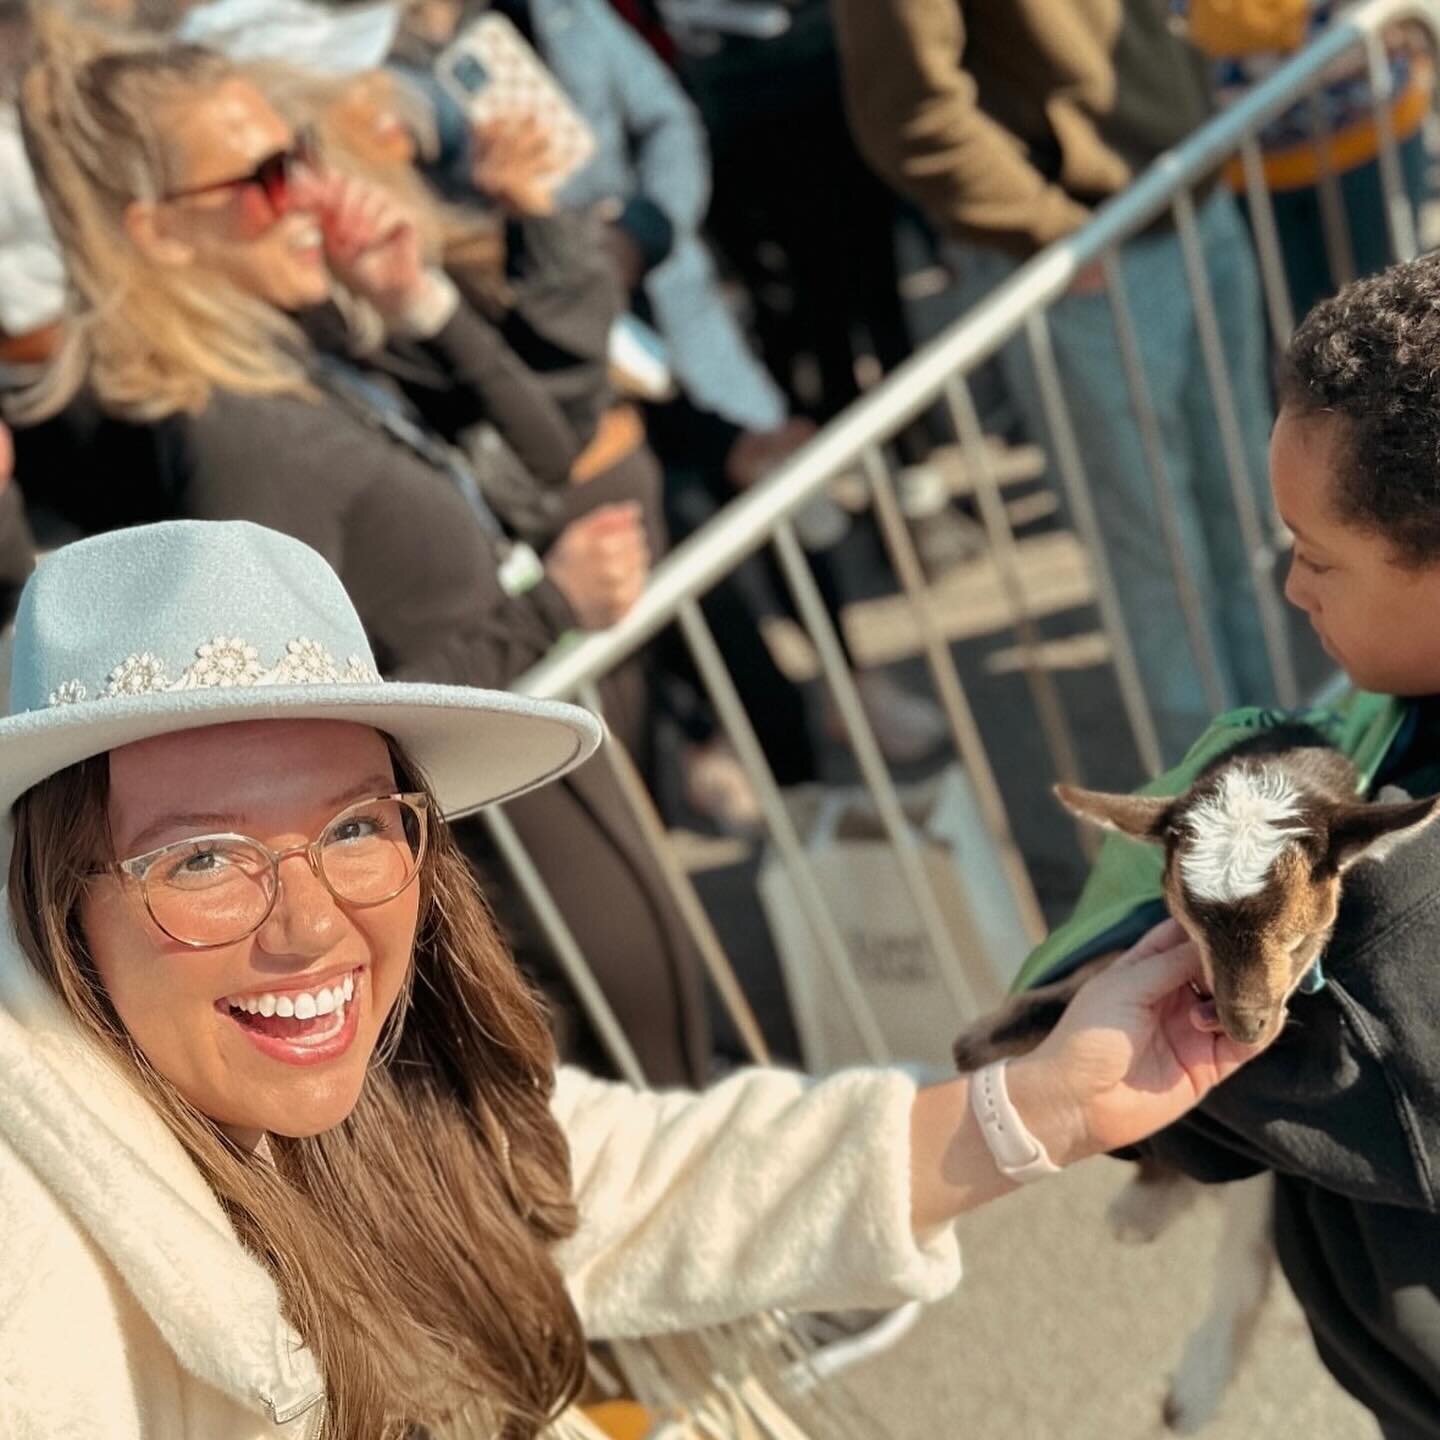 Another great BockFest! This street festival is hosted annually in Nulu and features local breweries, bourbon, food and goat races! 🐐 🍻 

@nuluofficial #Bockfest #goatraces